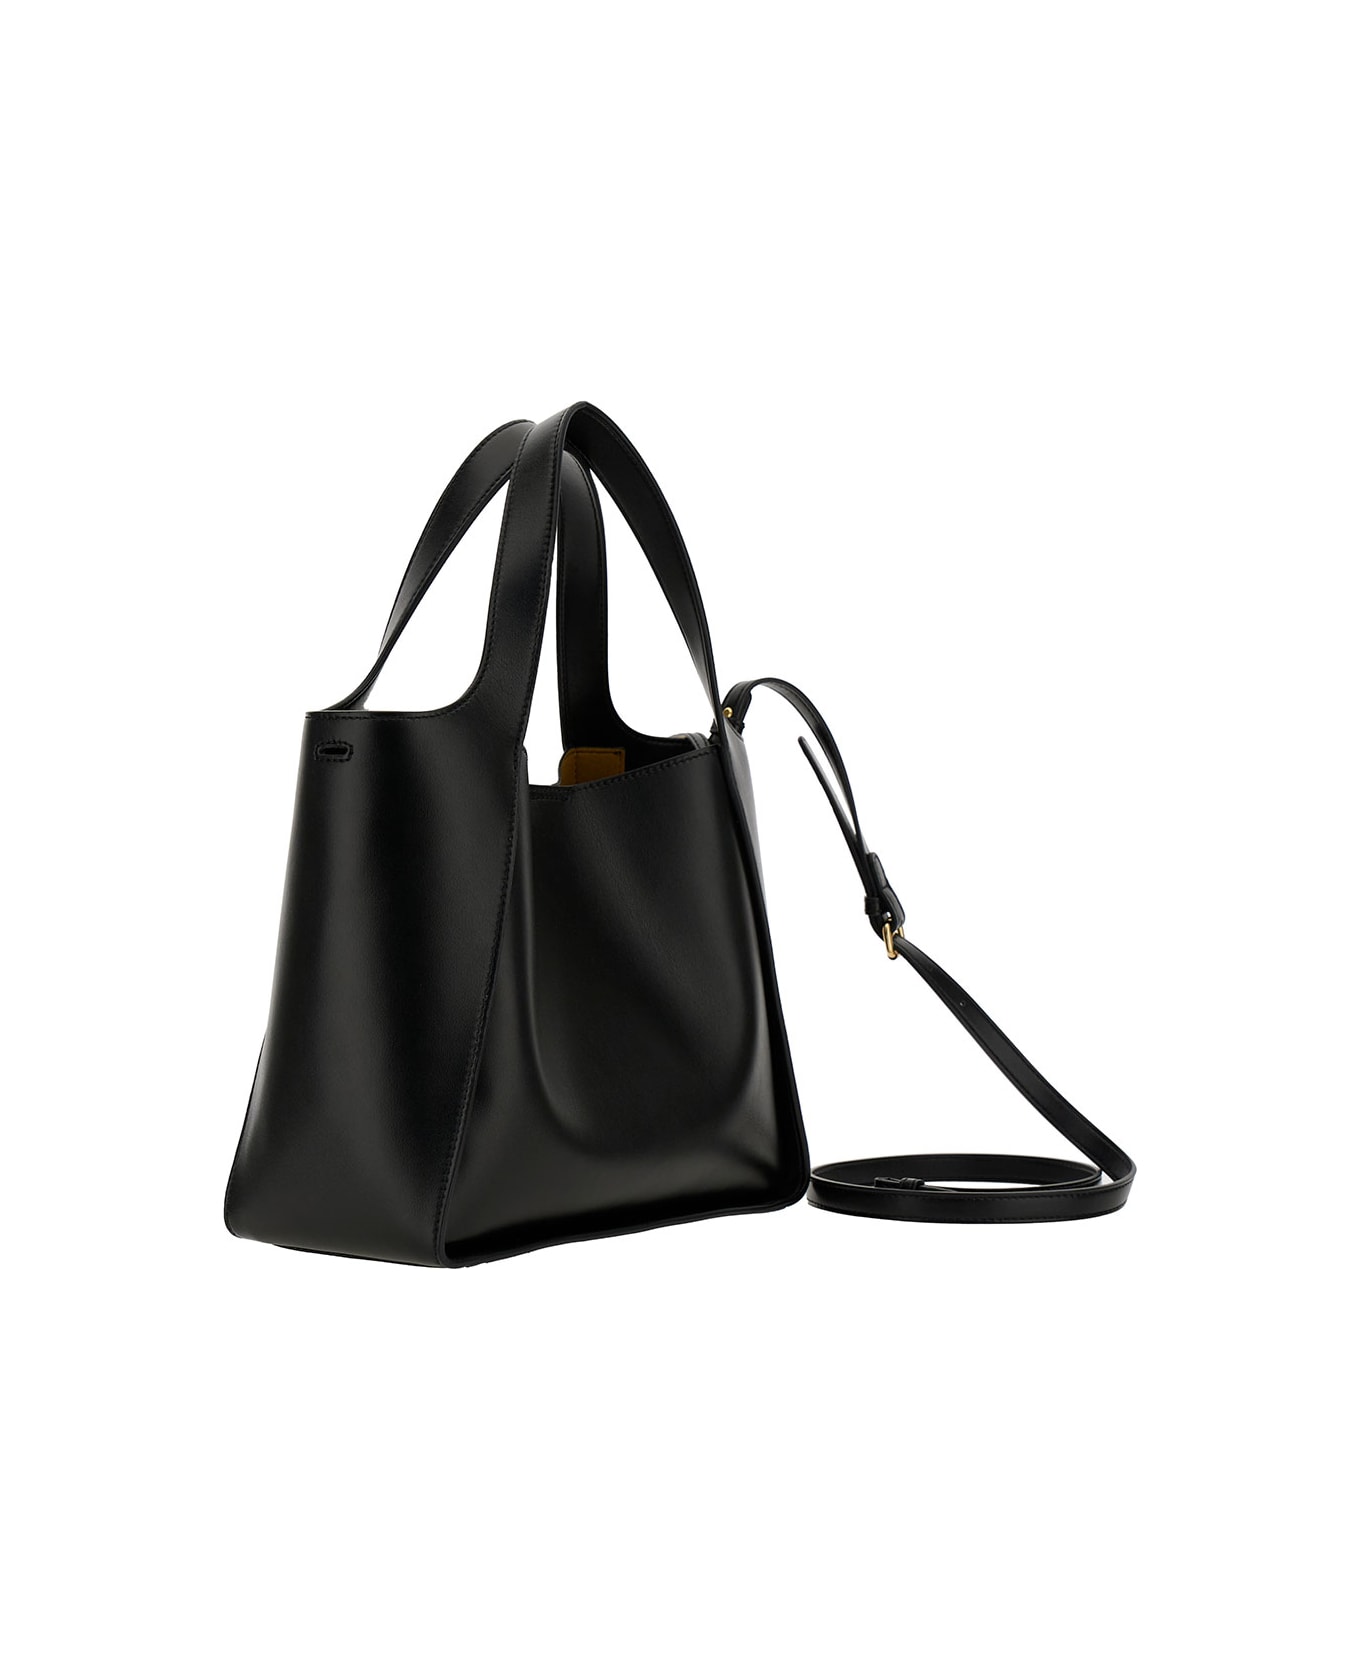 Stella McCartney Black Tote Bag With Perforated Logo Lettering Detail At The Front In Faux Leather Woman - Black